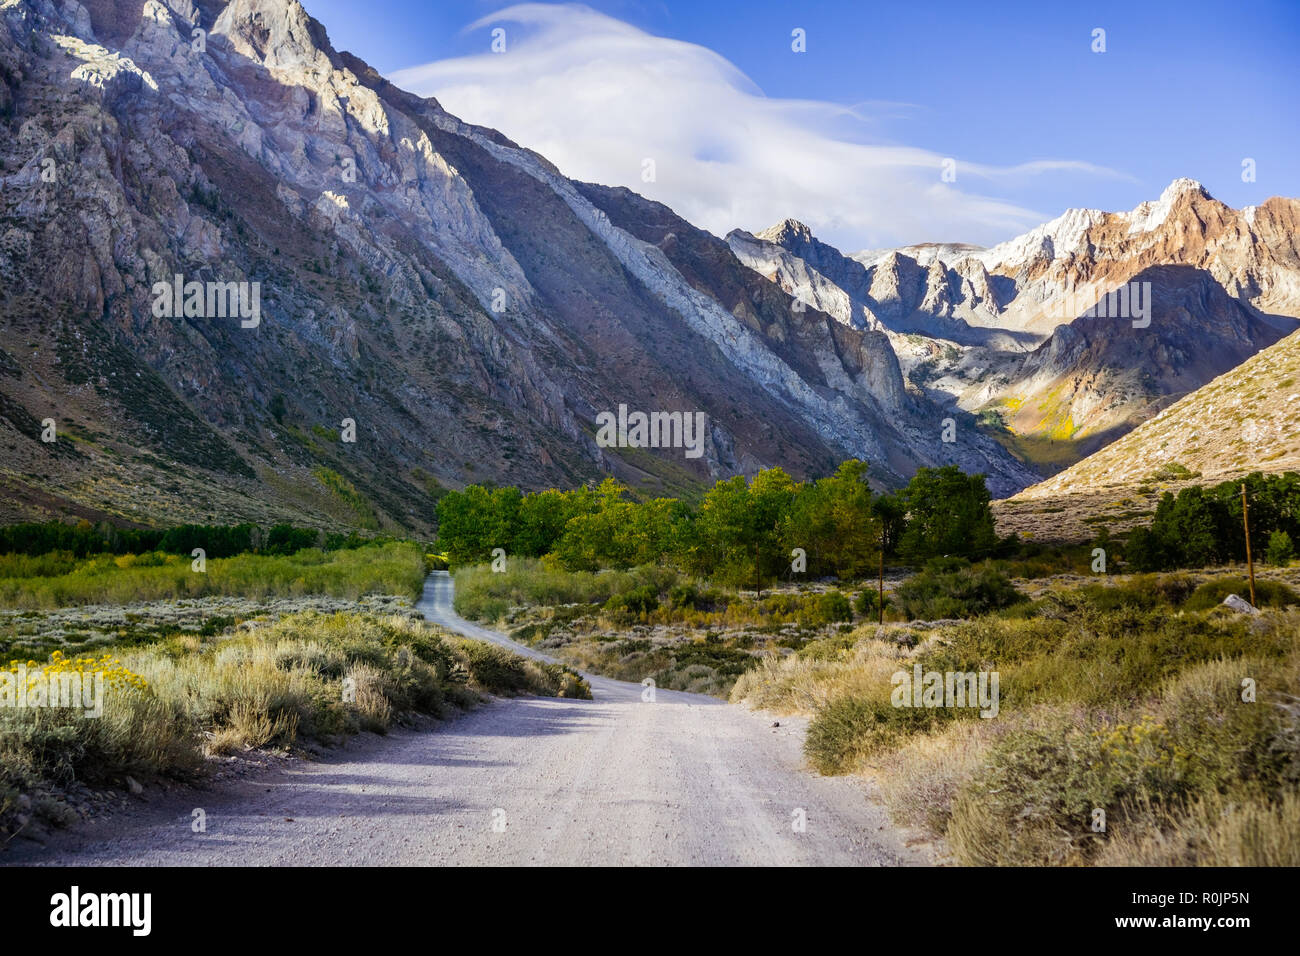 Morning views of the rocky ridges and summits of Eastern Sierra mountains taken from the unpaved road to McGee Creek trail head, California Stock Photo